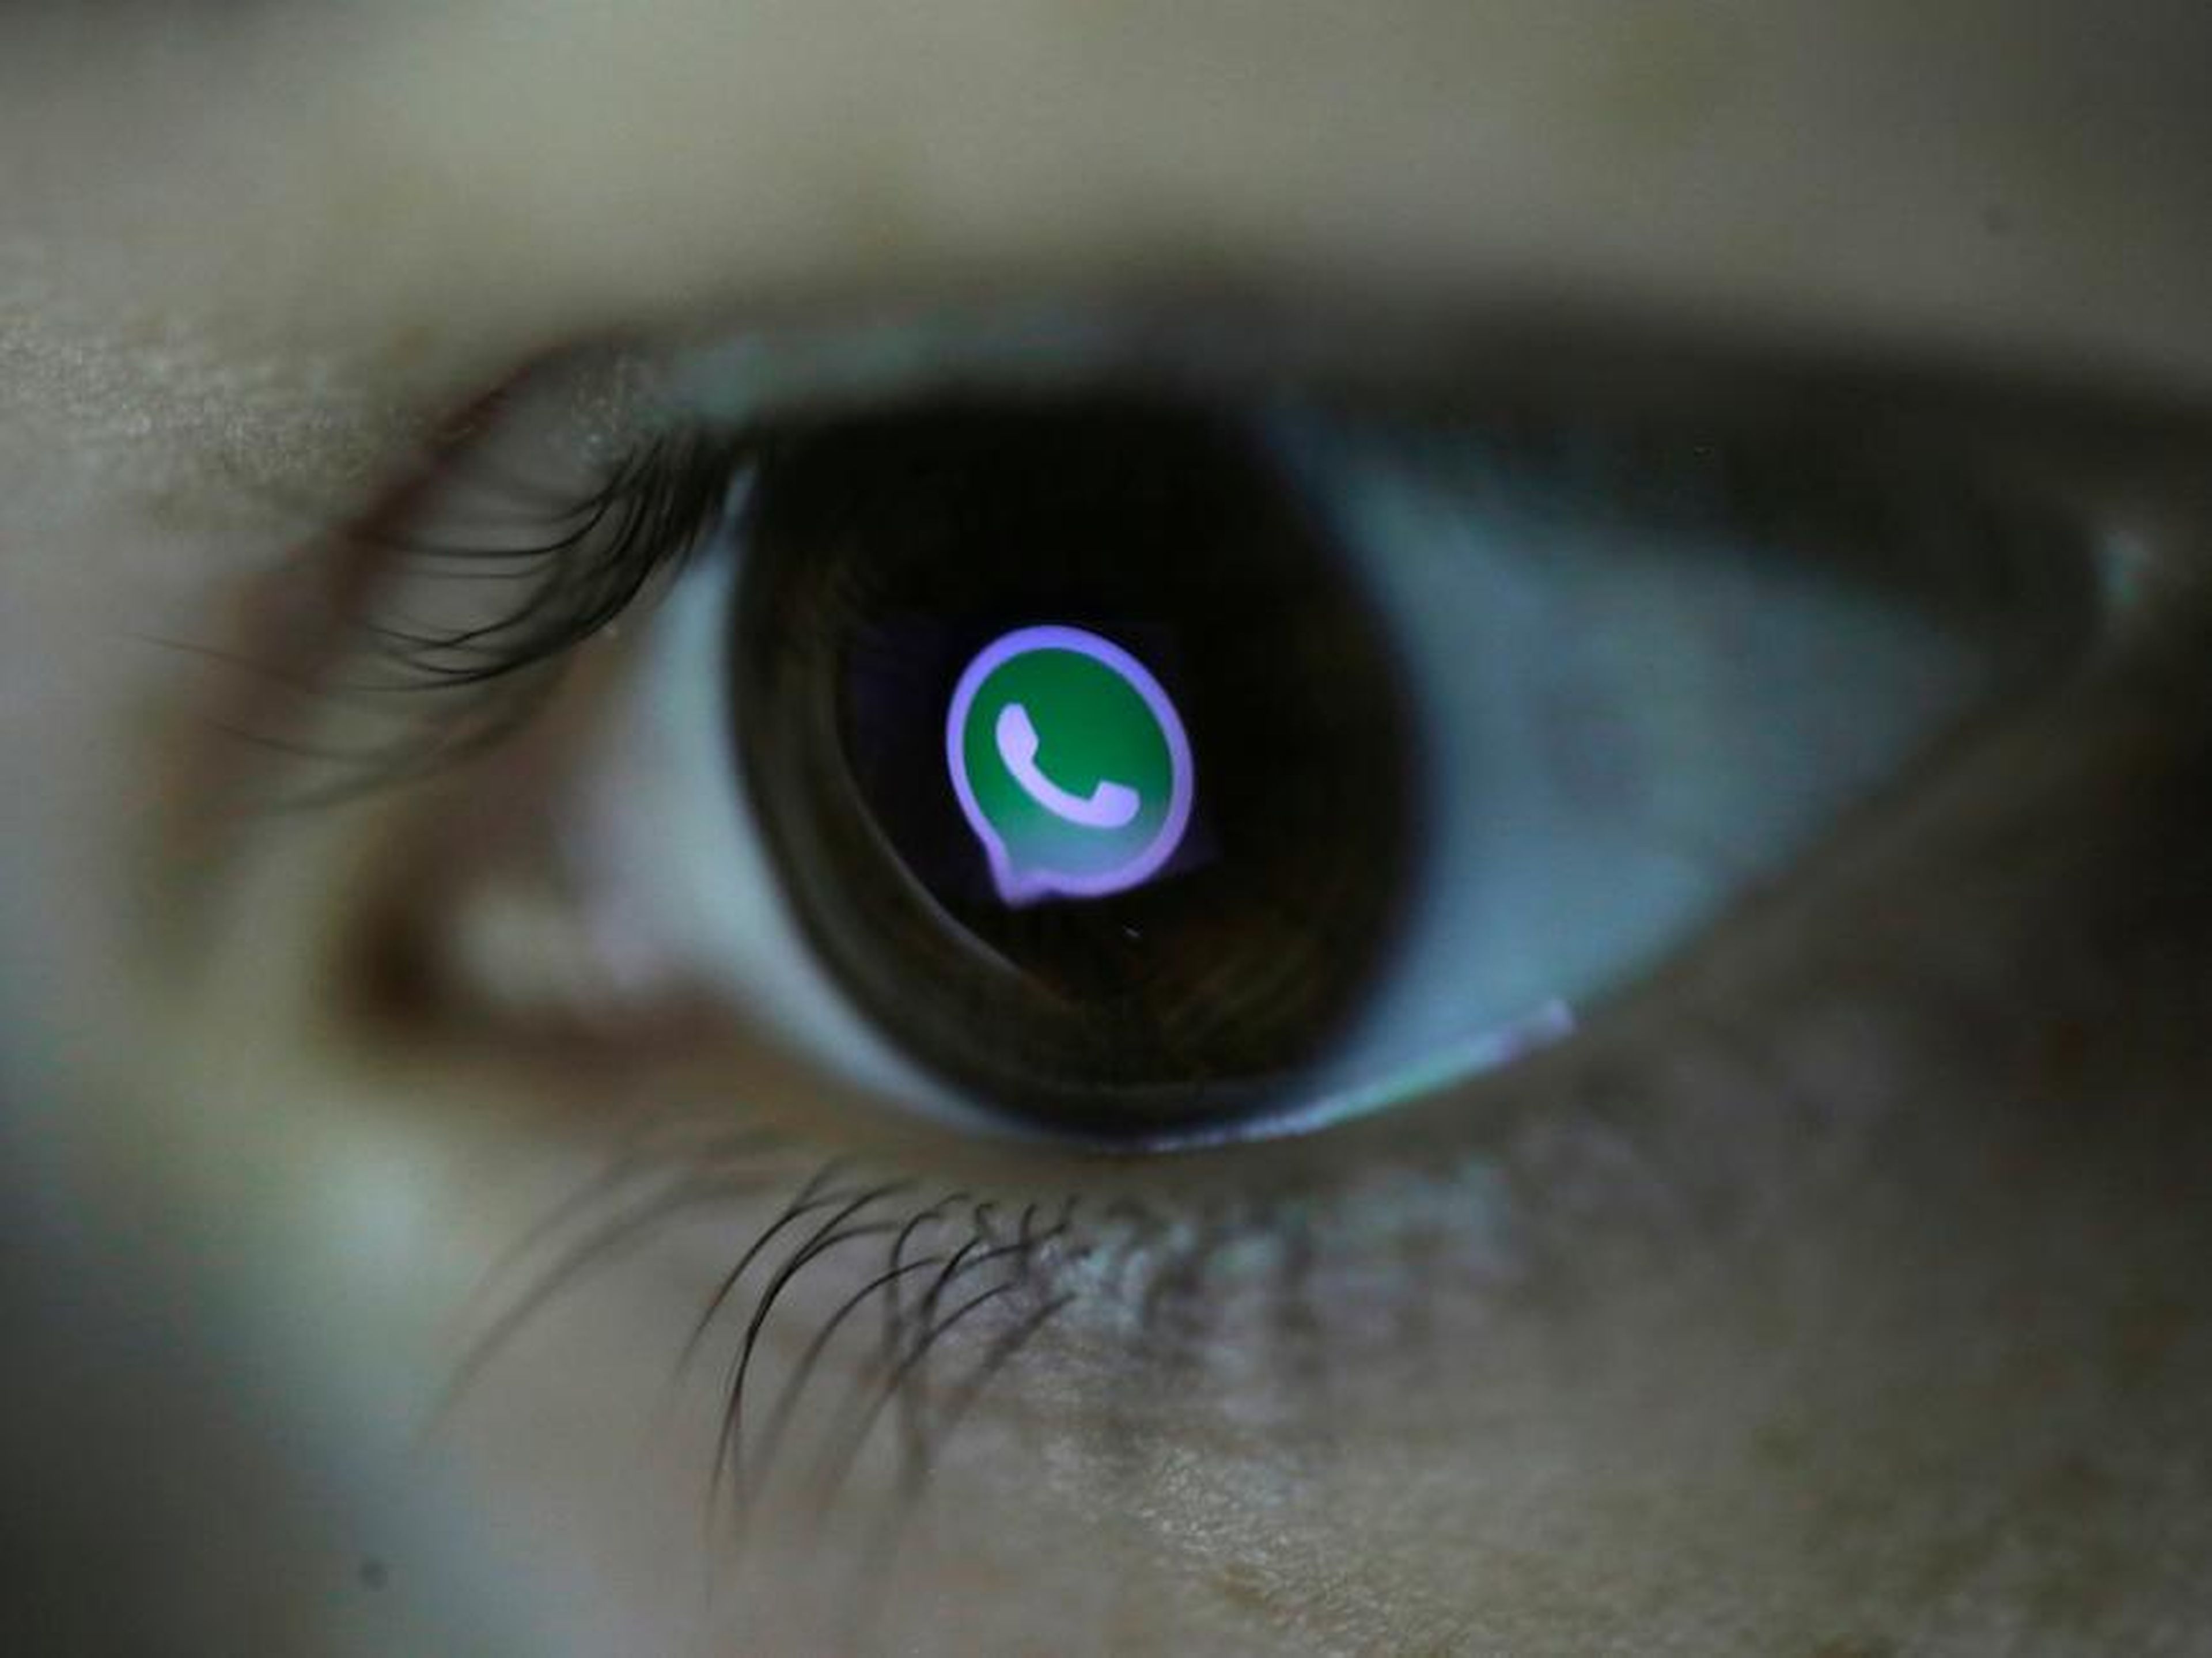 Hackers used a WhatsApp exploit to install malware on iPhones and Androids.